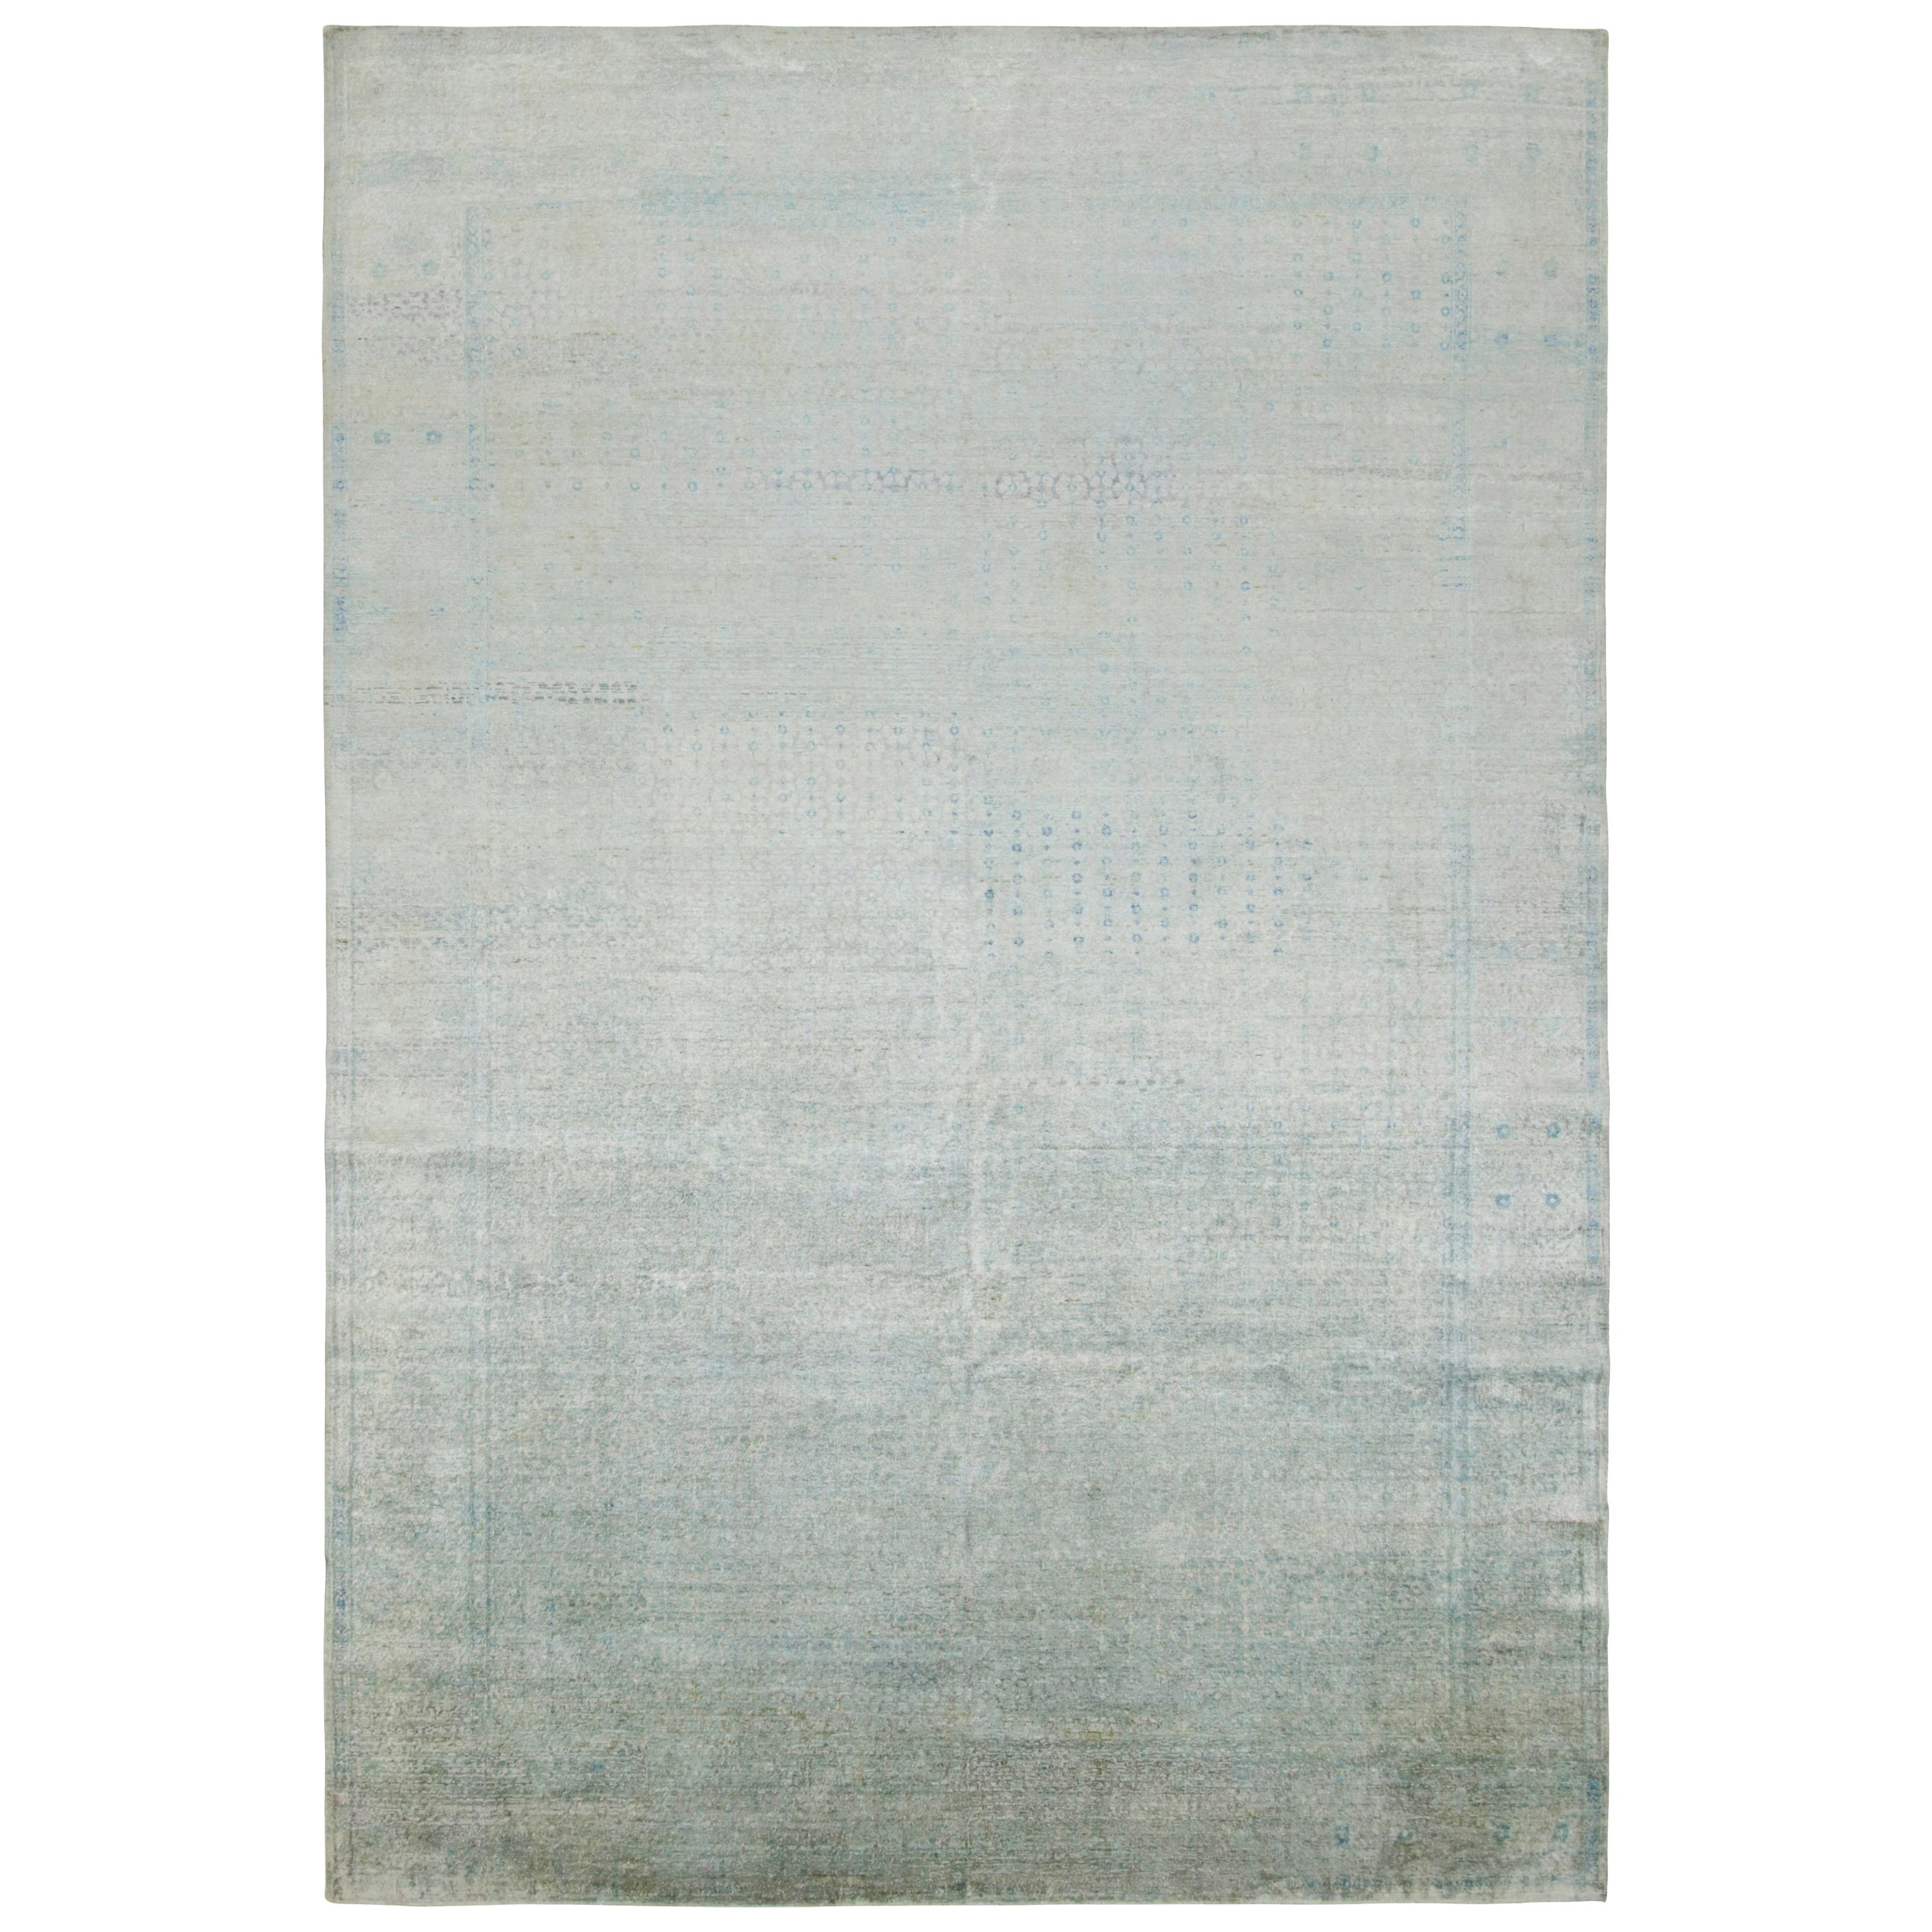 Rug & Kilim’s Modern Classic Rug in Blue and Silver/Gray Gentle Patterns